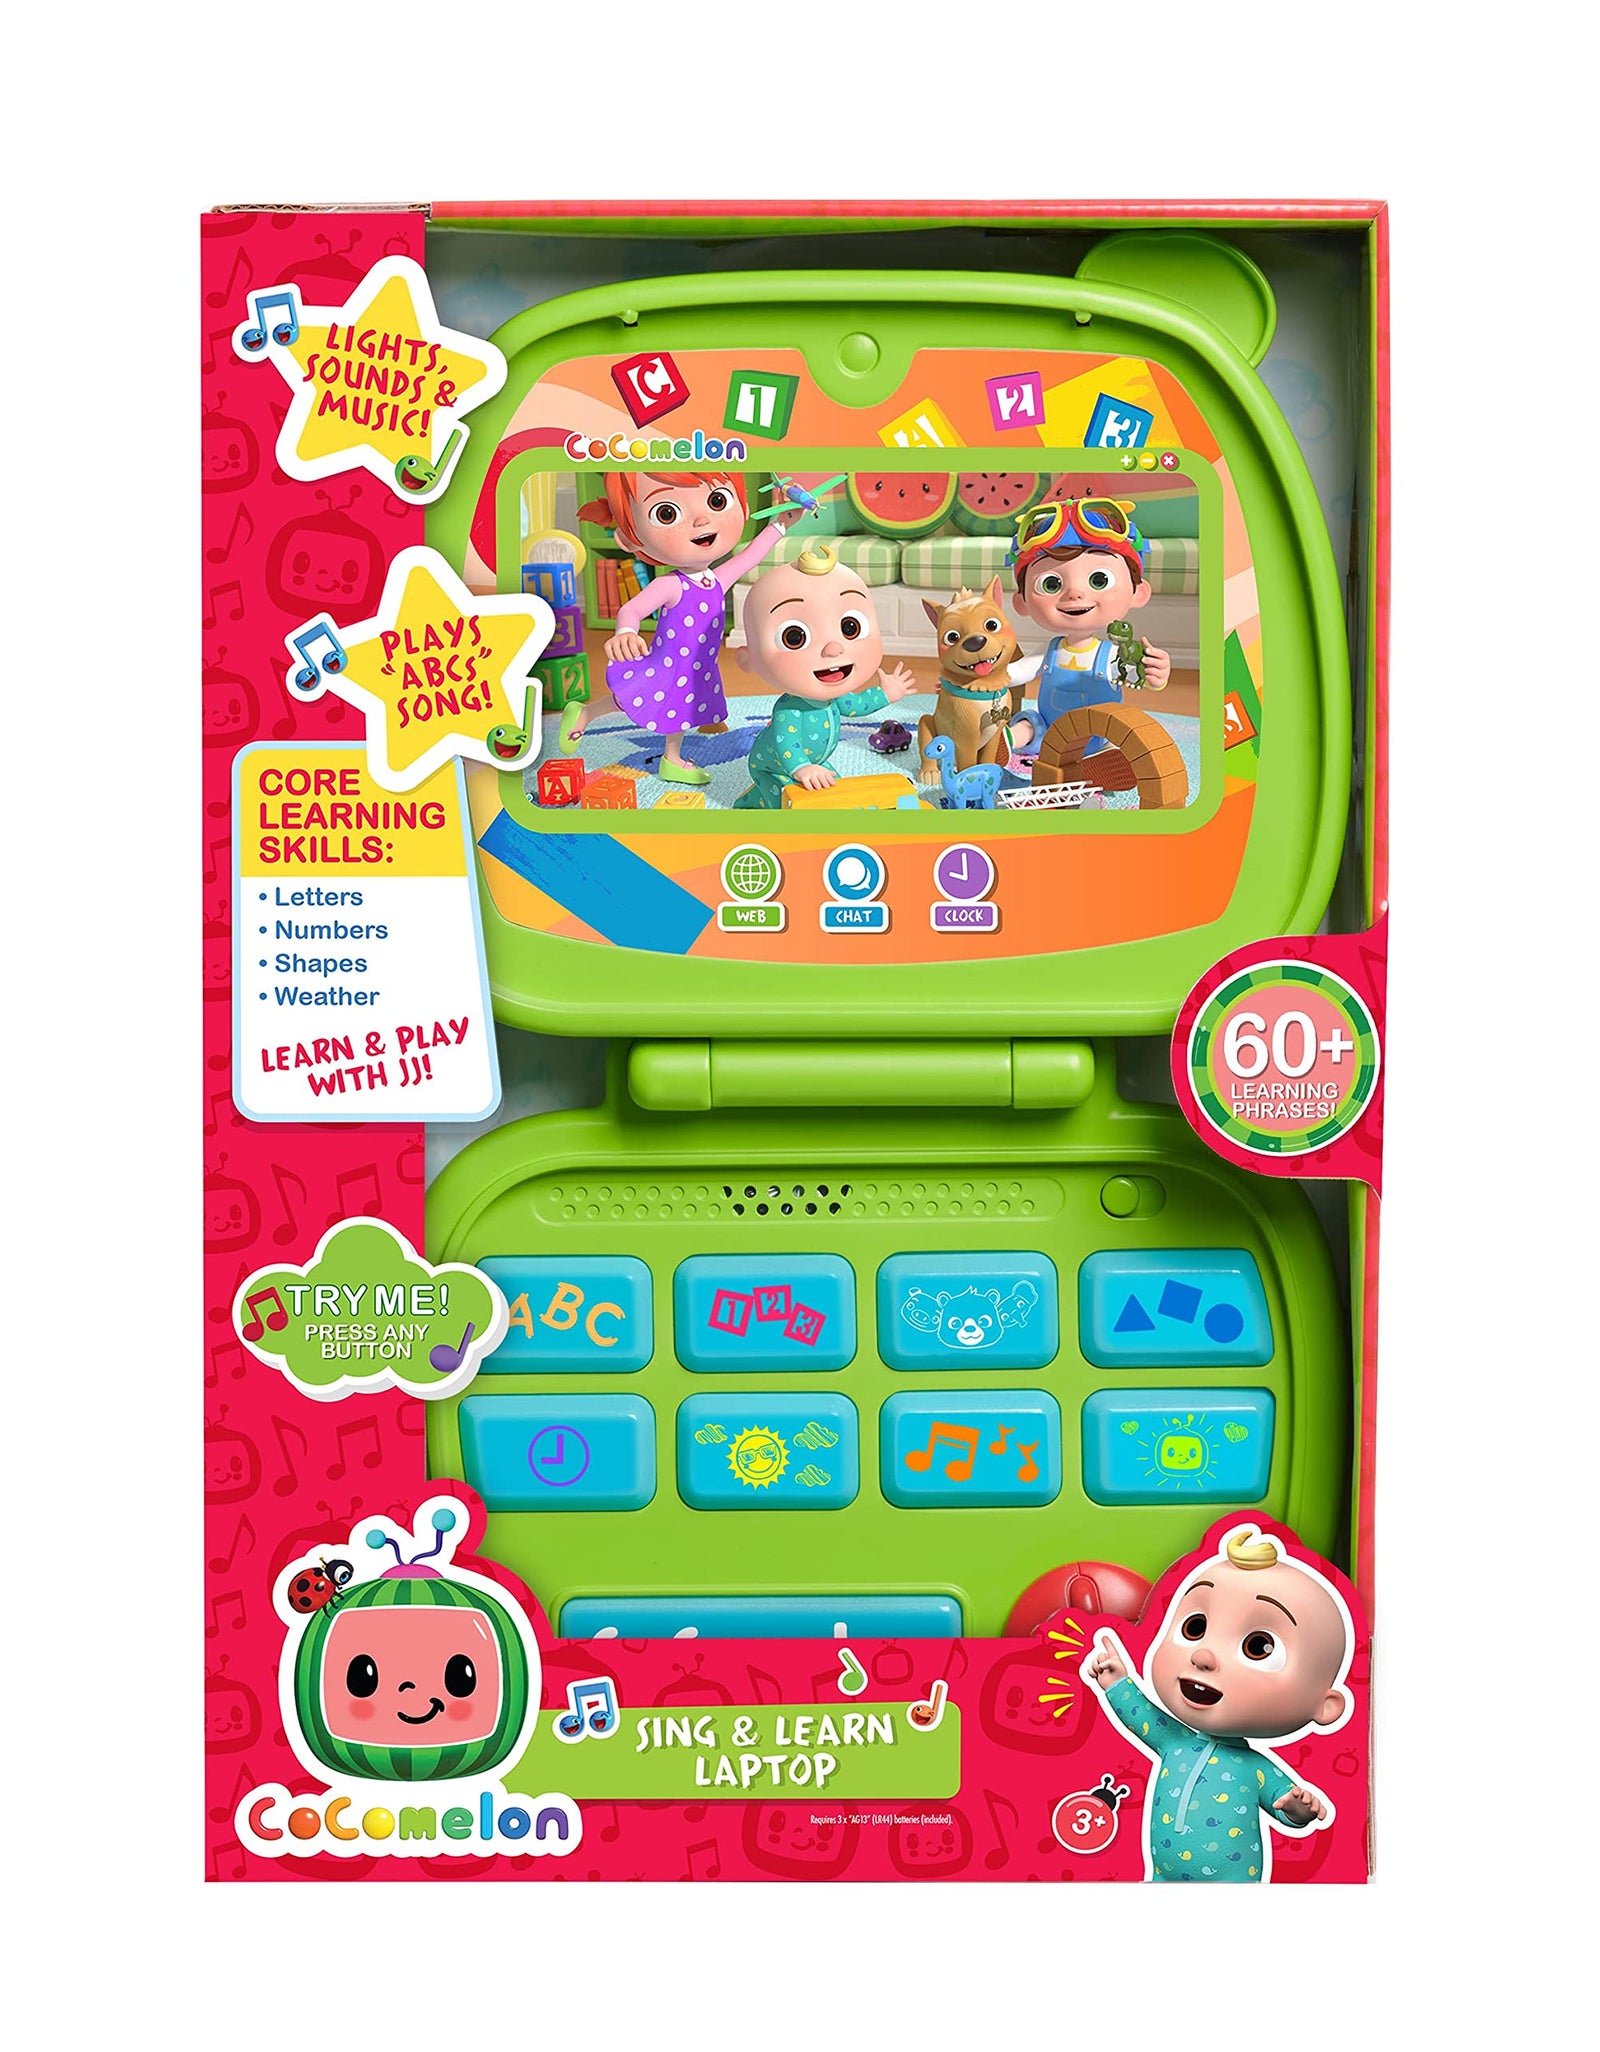 CoComelon Sing and Learn Laptop Toy for Kids, Lights, Sounds, and Music Encourages Letter, Number, Shape, and Animal Recognition, by Just Play